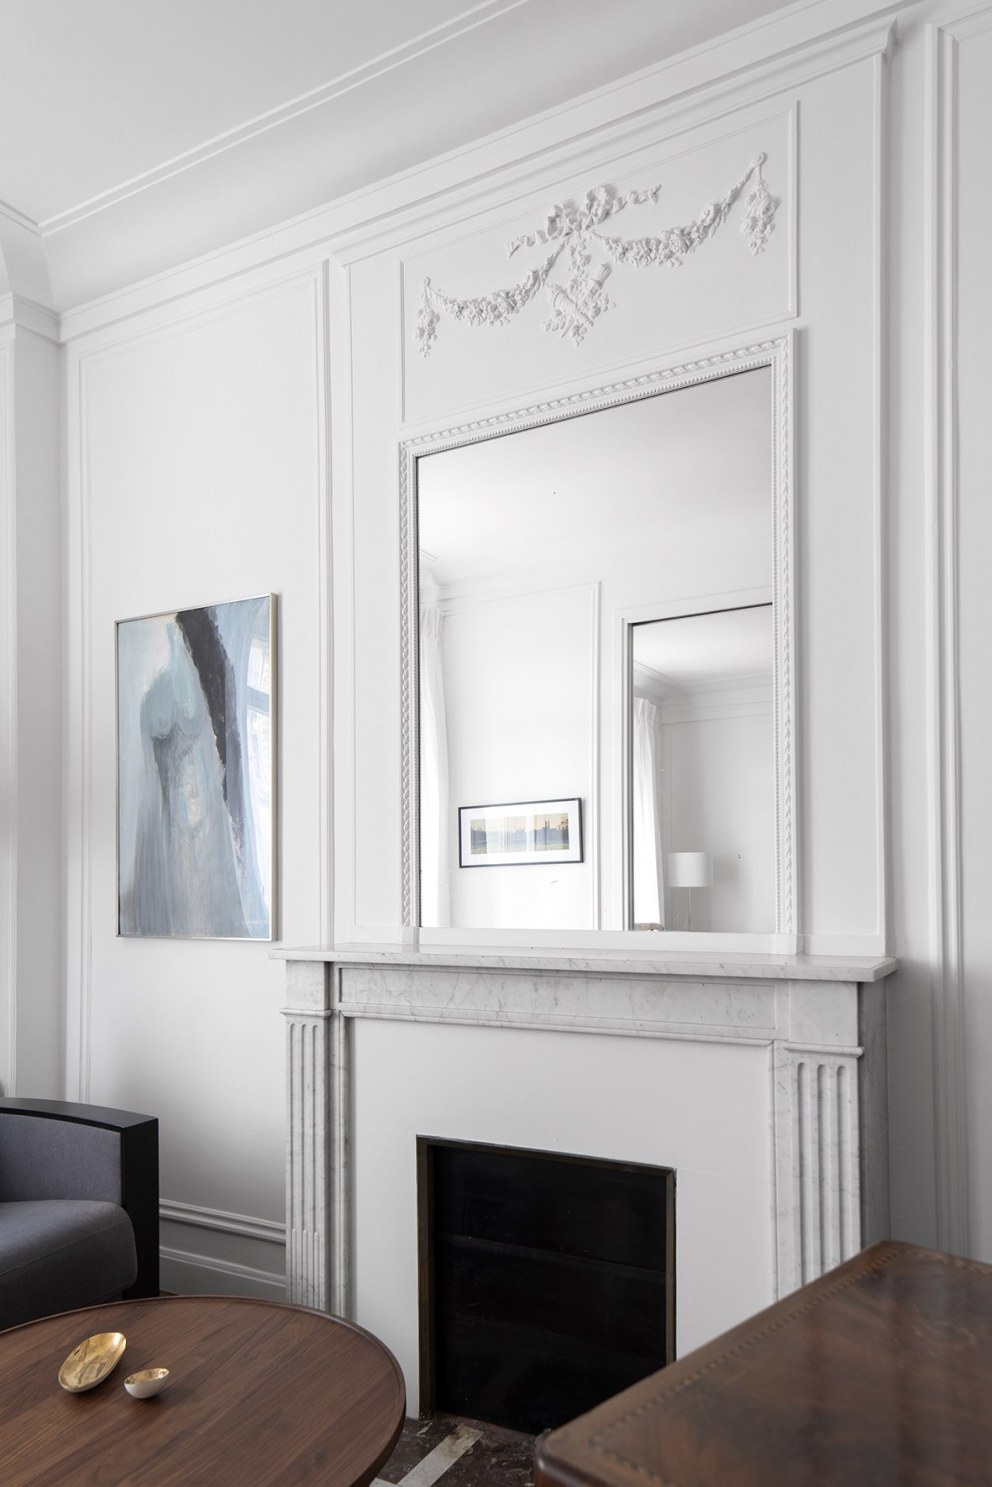 AN ELEGANT PIED-A-TERRE | PIED-A-TERRE 1 | Interior Designers